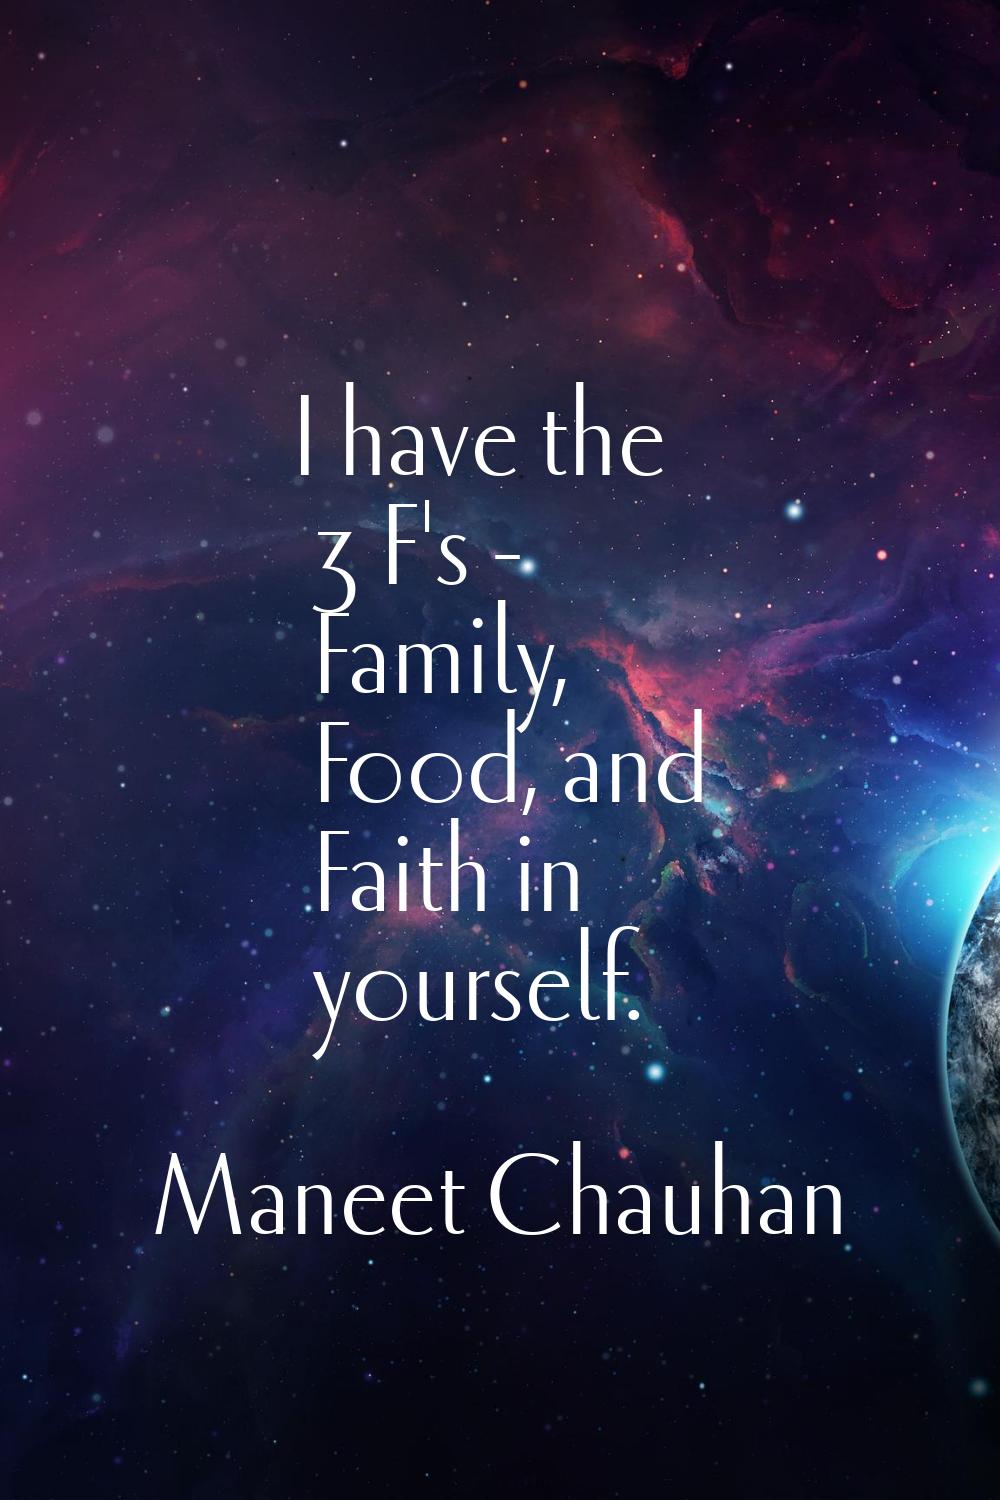 I have the 3 F's - Family, Food, and Faith in yourself.